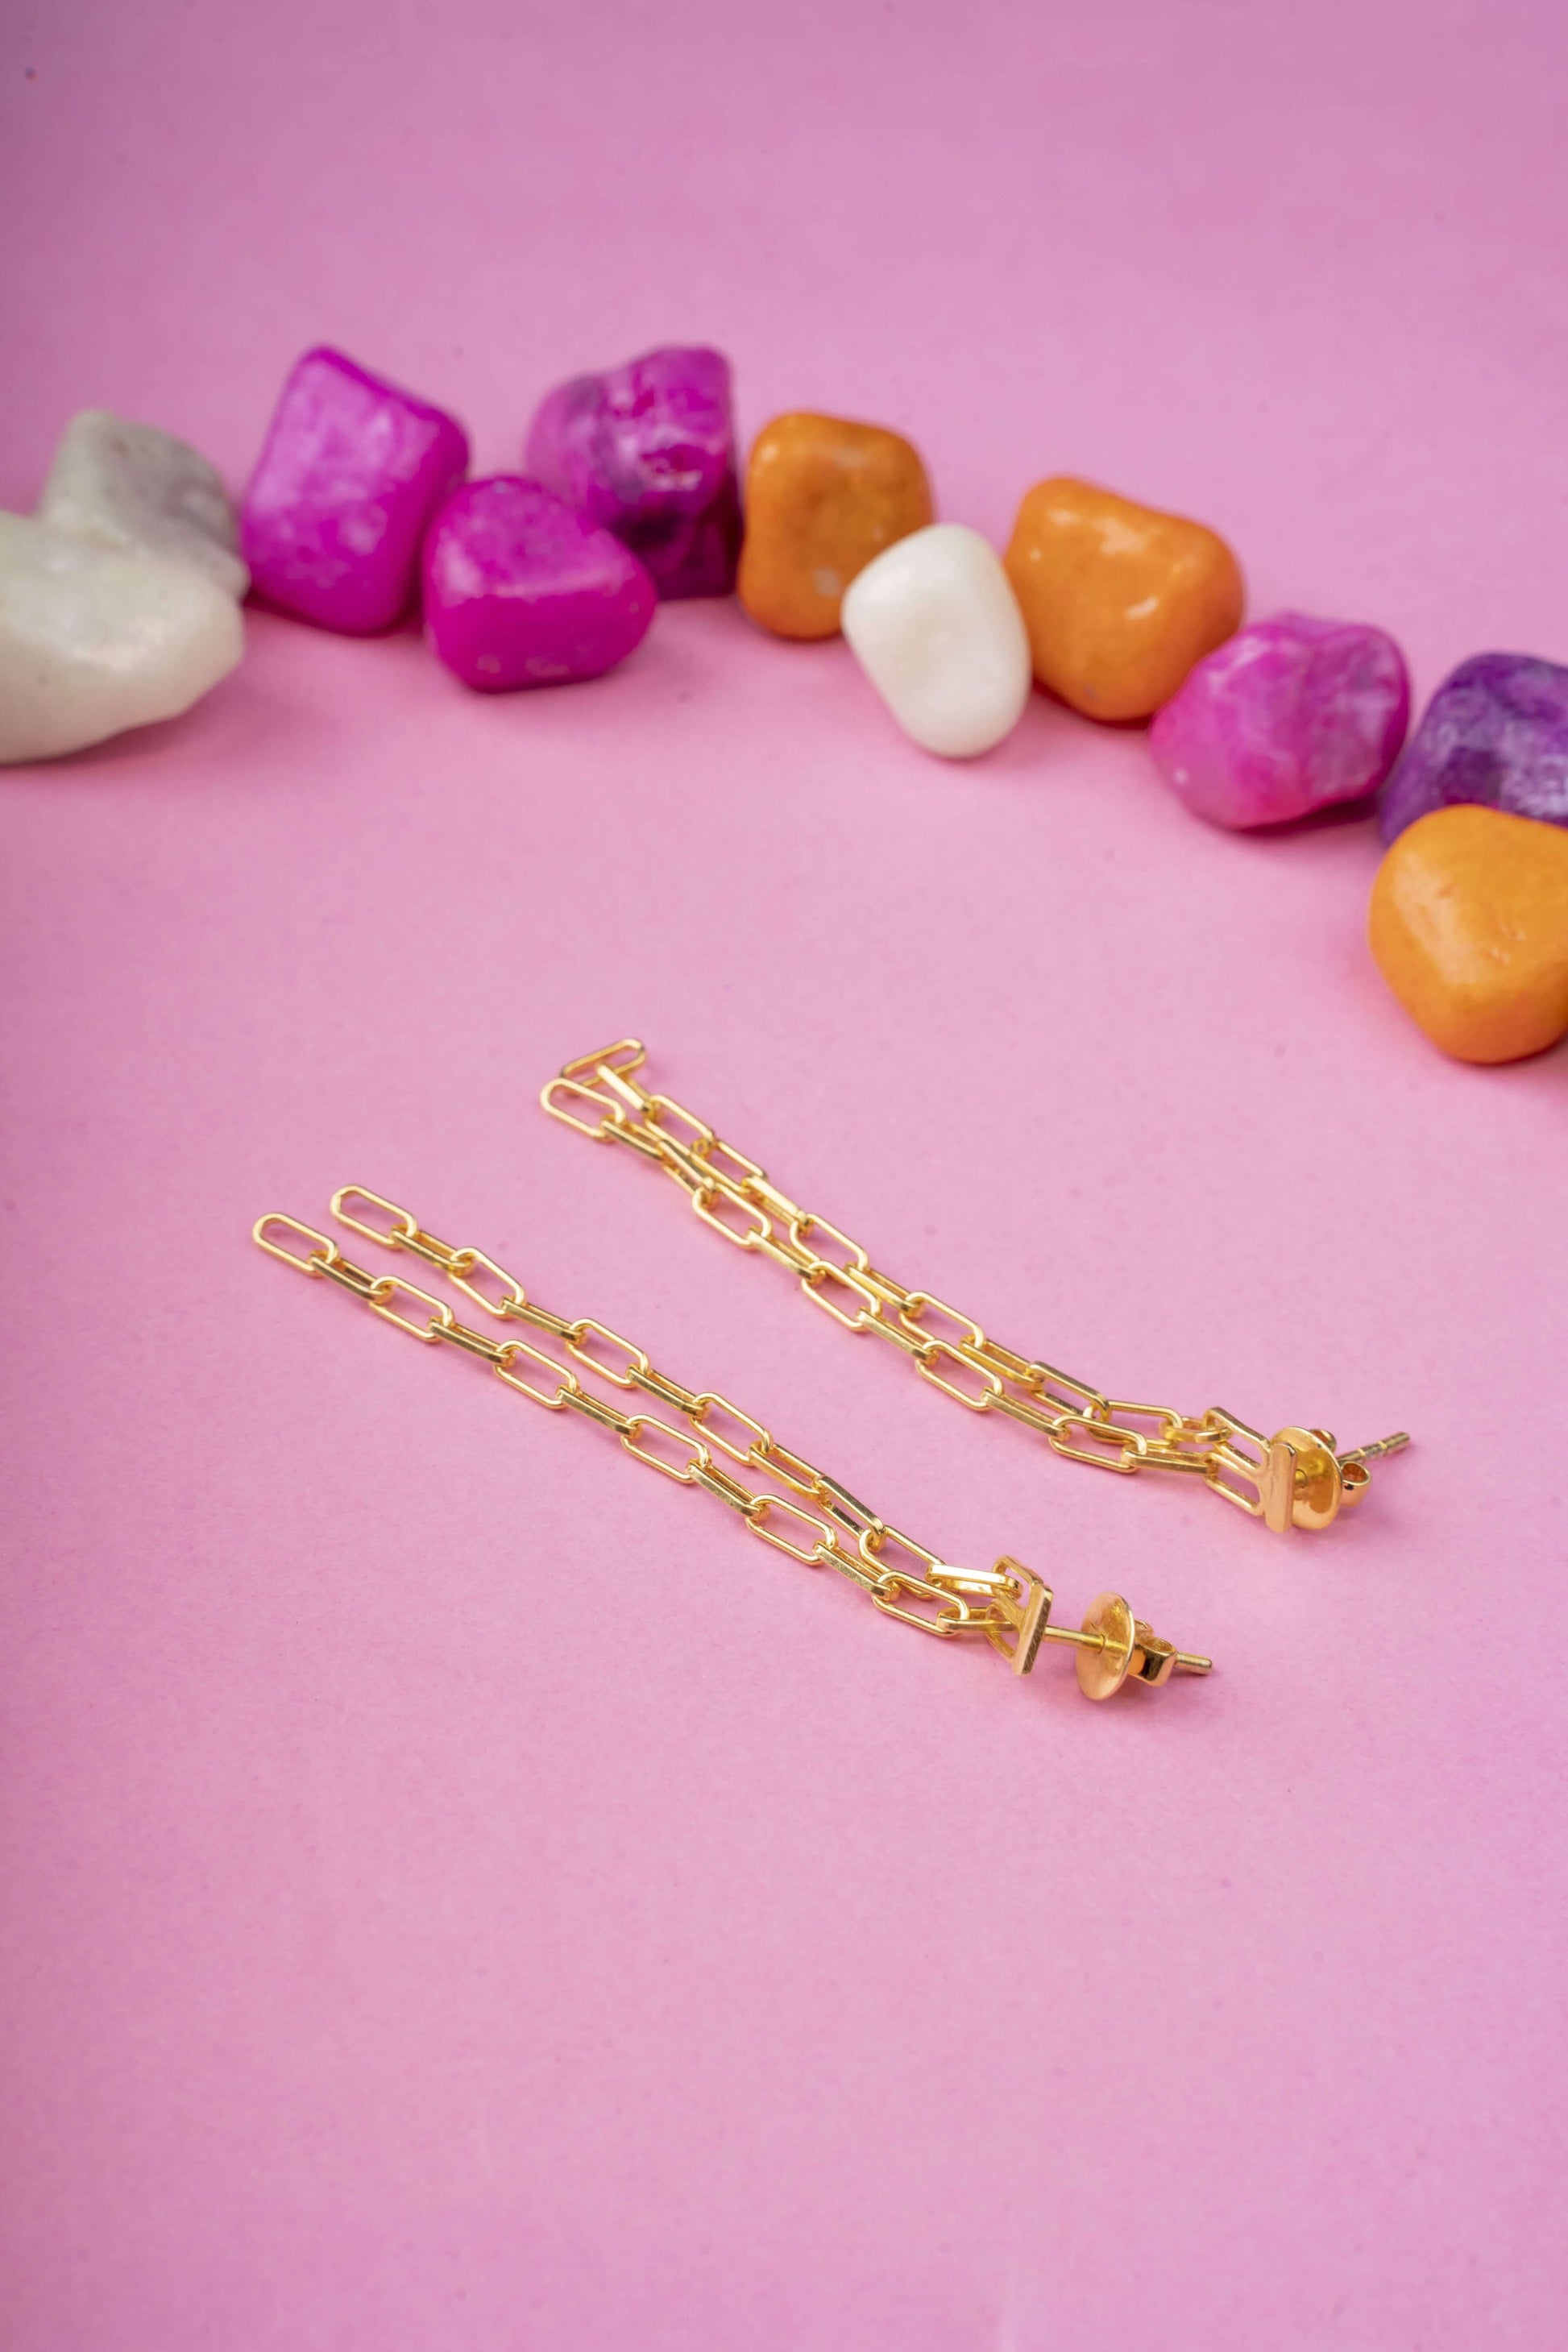 Gold Plated Micro Earrings 6